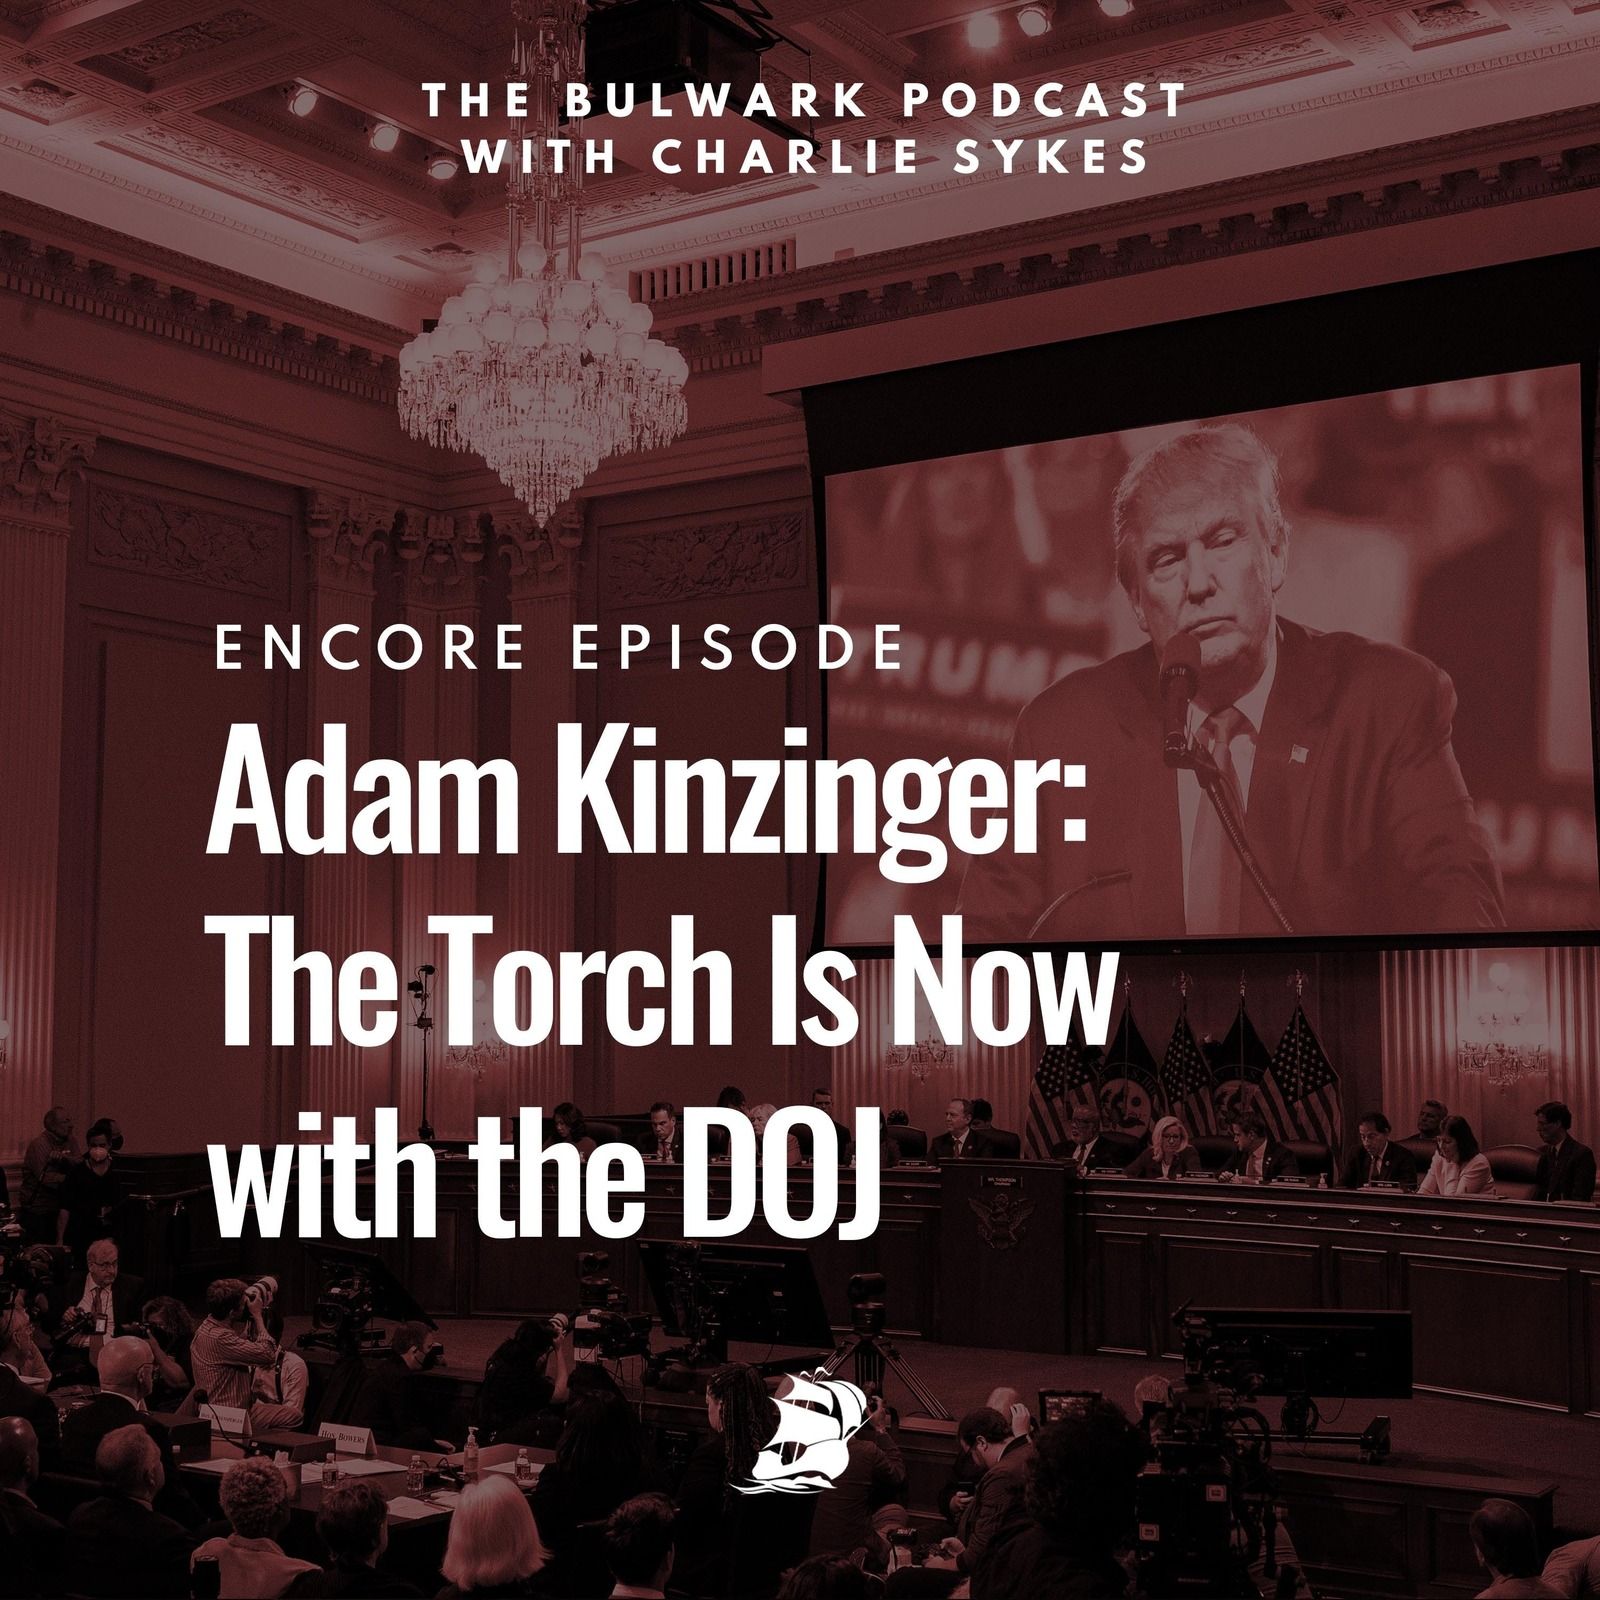 Adam Kinzinger: The Torch Is Now with the DOJ (Encore Episode) by The Bulwark Podcast